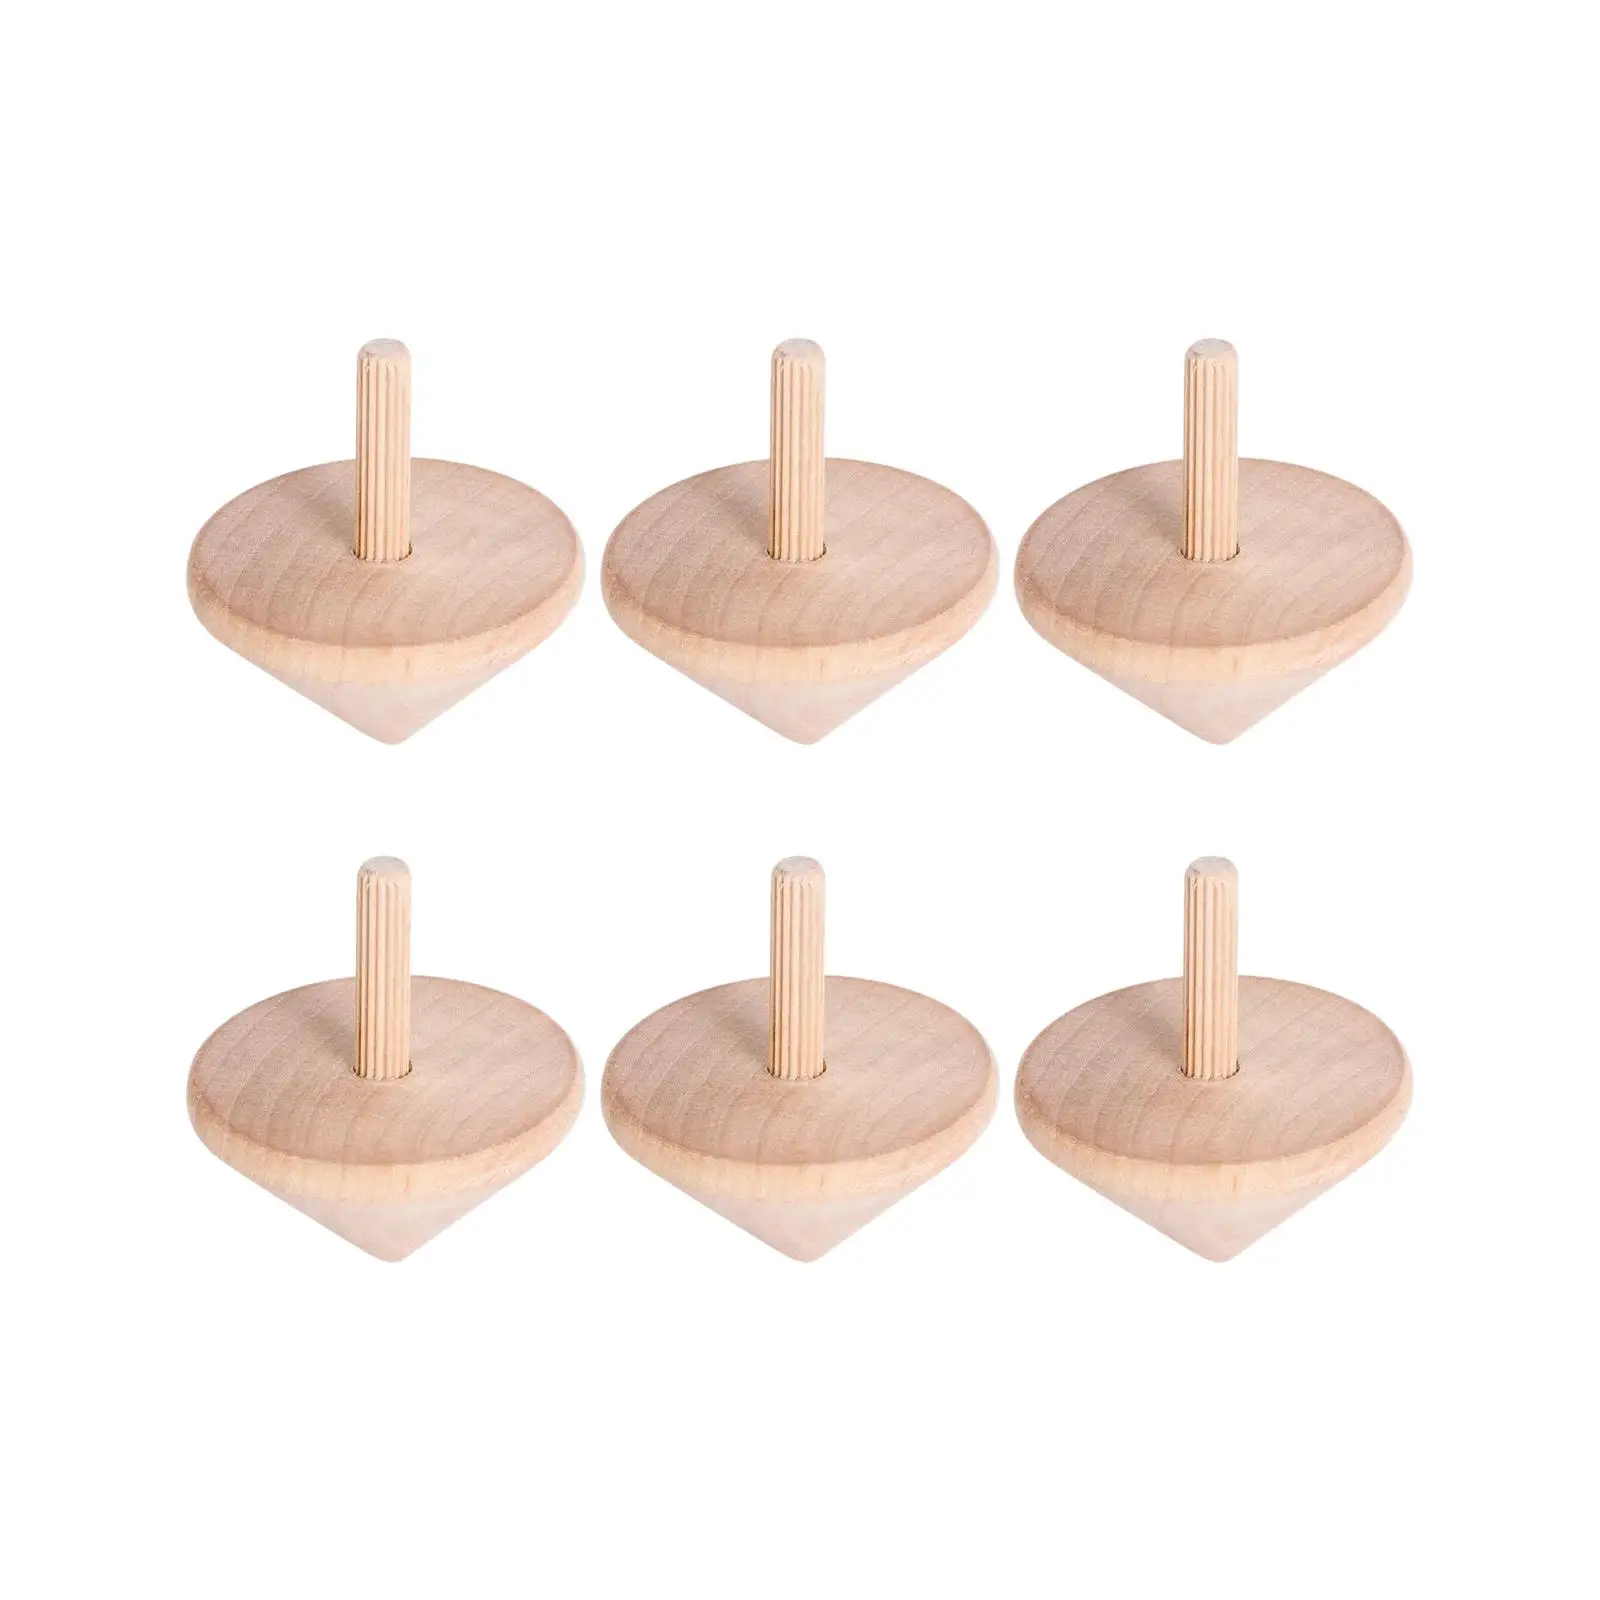 6 Pieces Unpainted Wood Tops Traditional Nostalgic Toys Kindergarten Interactive Toys Handmade DIY for Adults Party Favors Gift